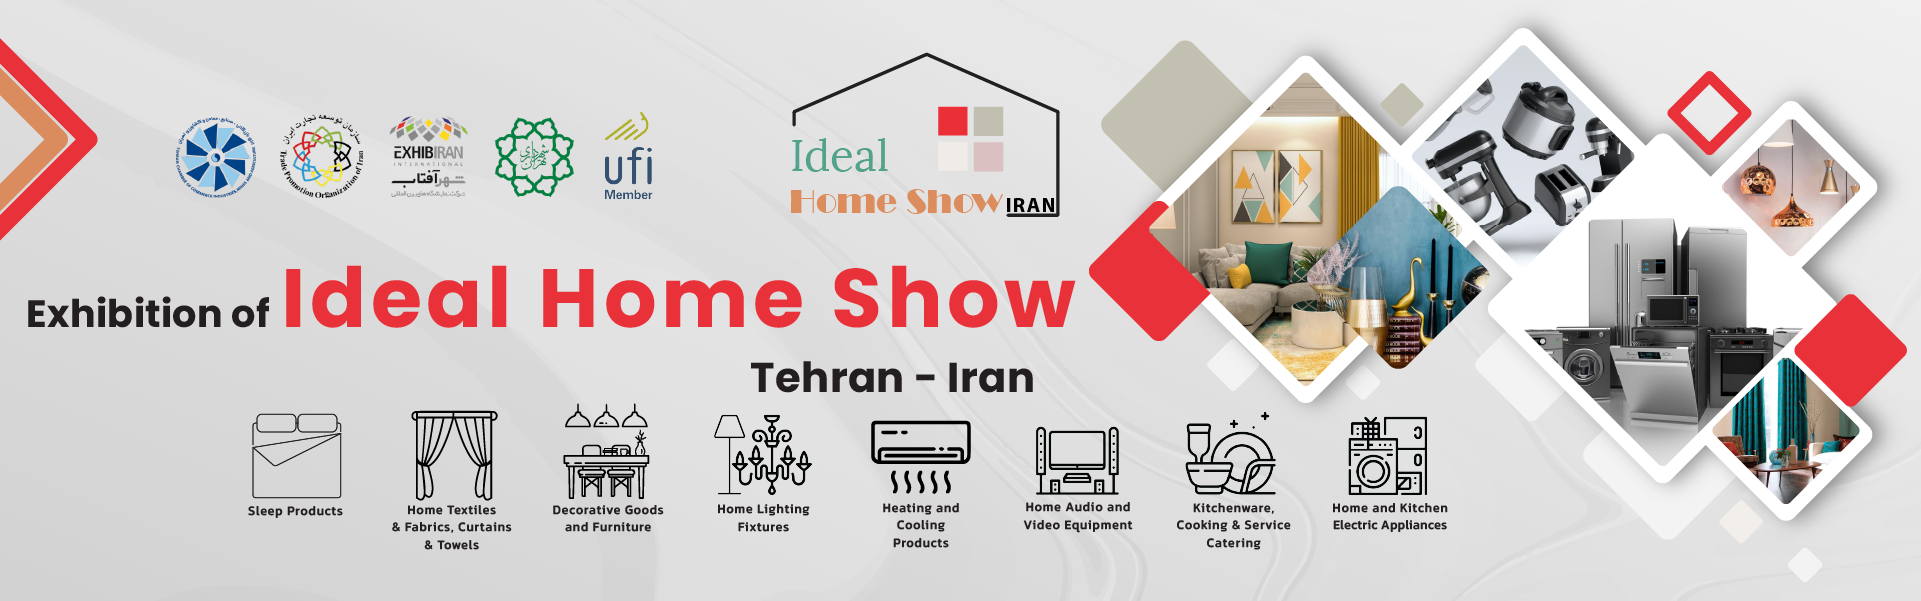 Iran household appliances exhibition (IRAN IDEAL HOME SHOW)